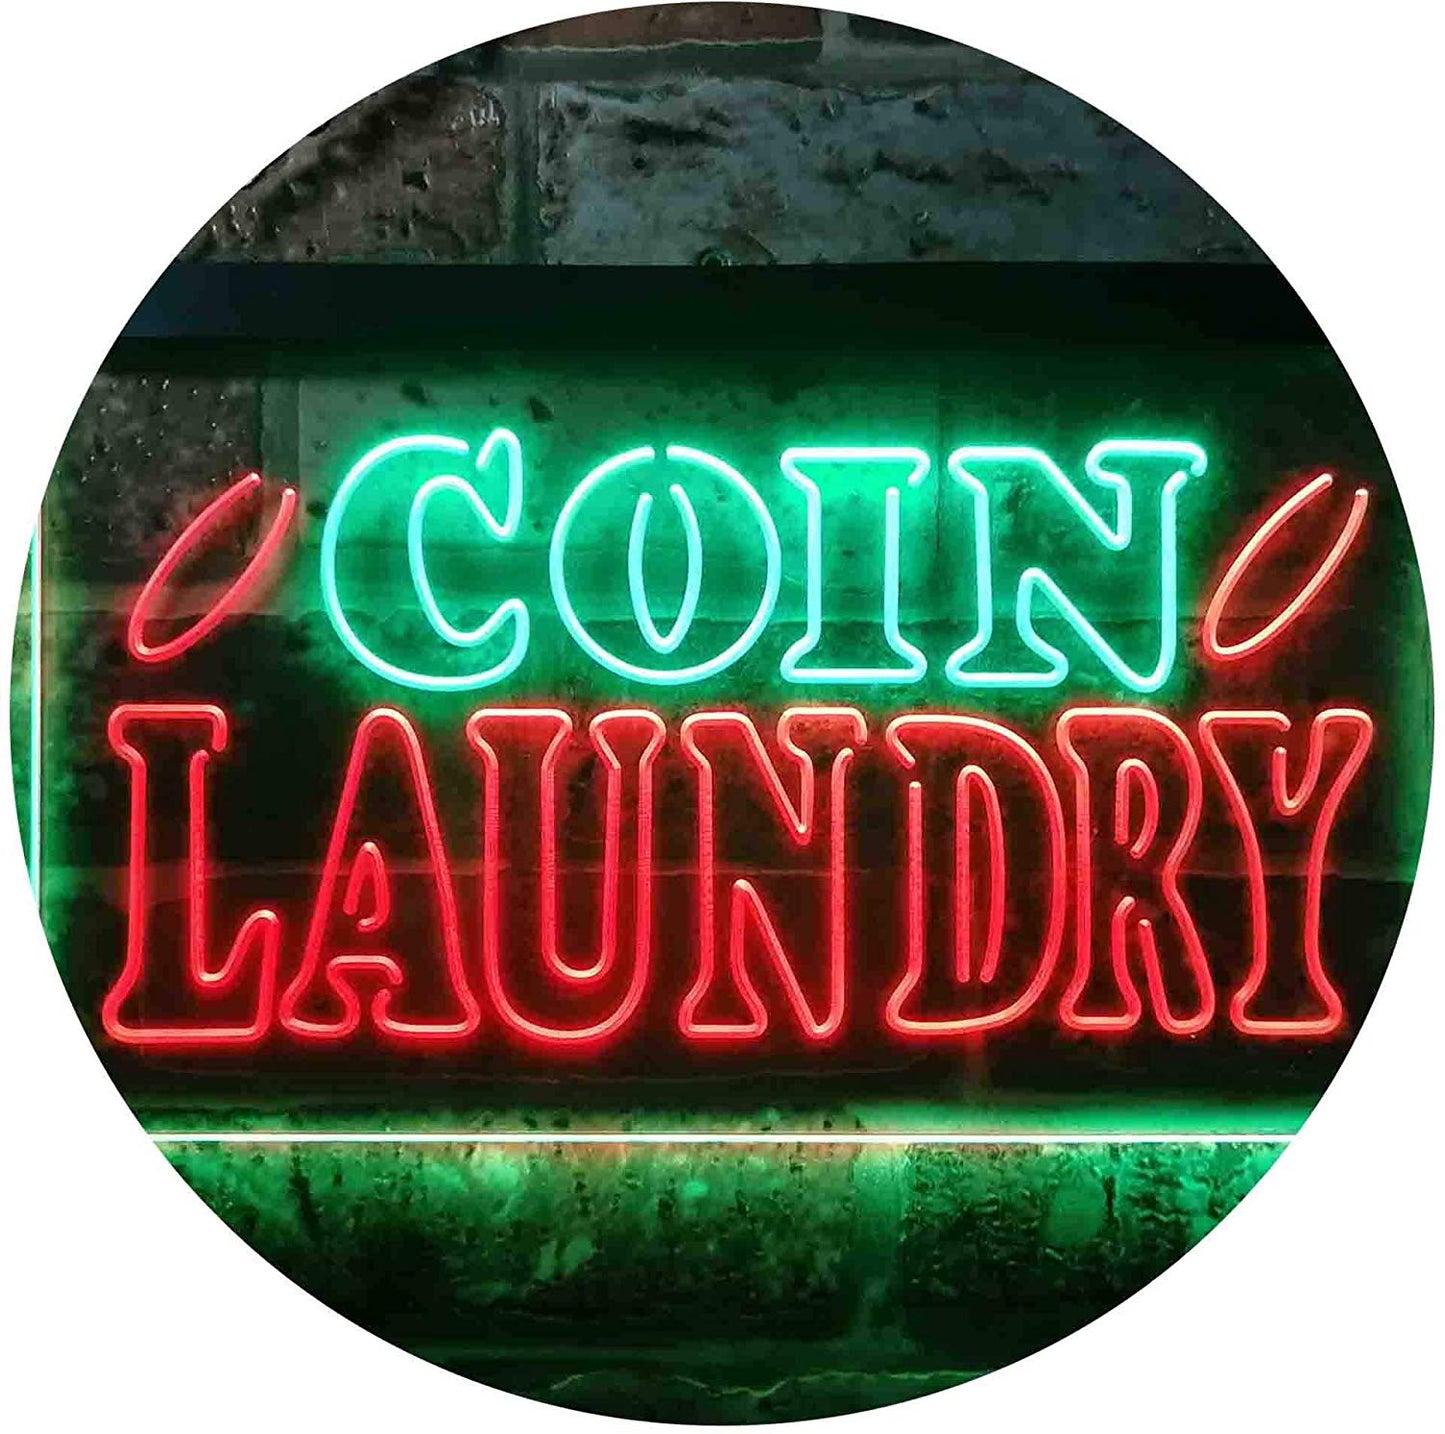 Laundromat Coin Laundry LED Neon Light Sign - Way Up Gifts